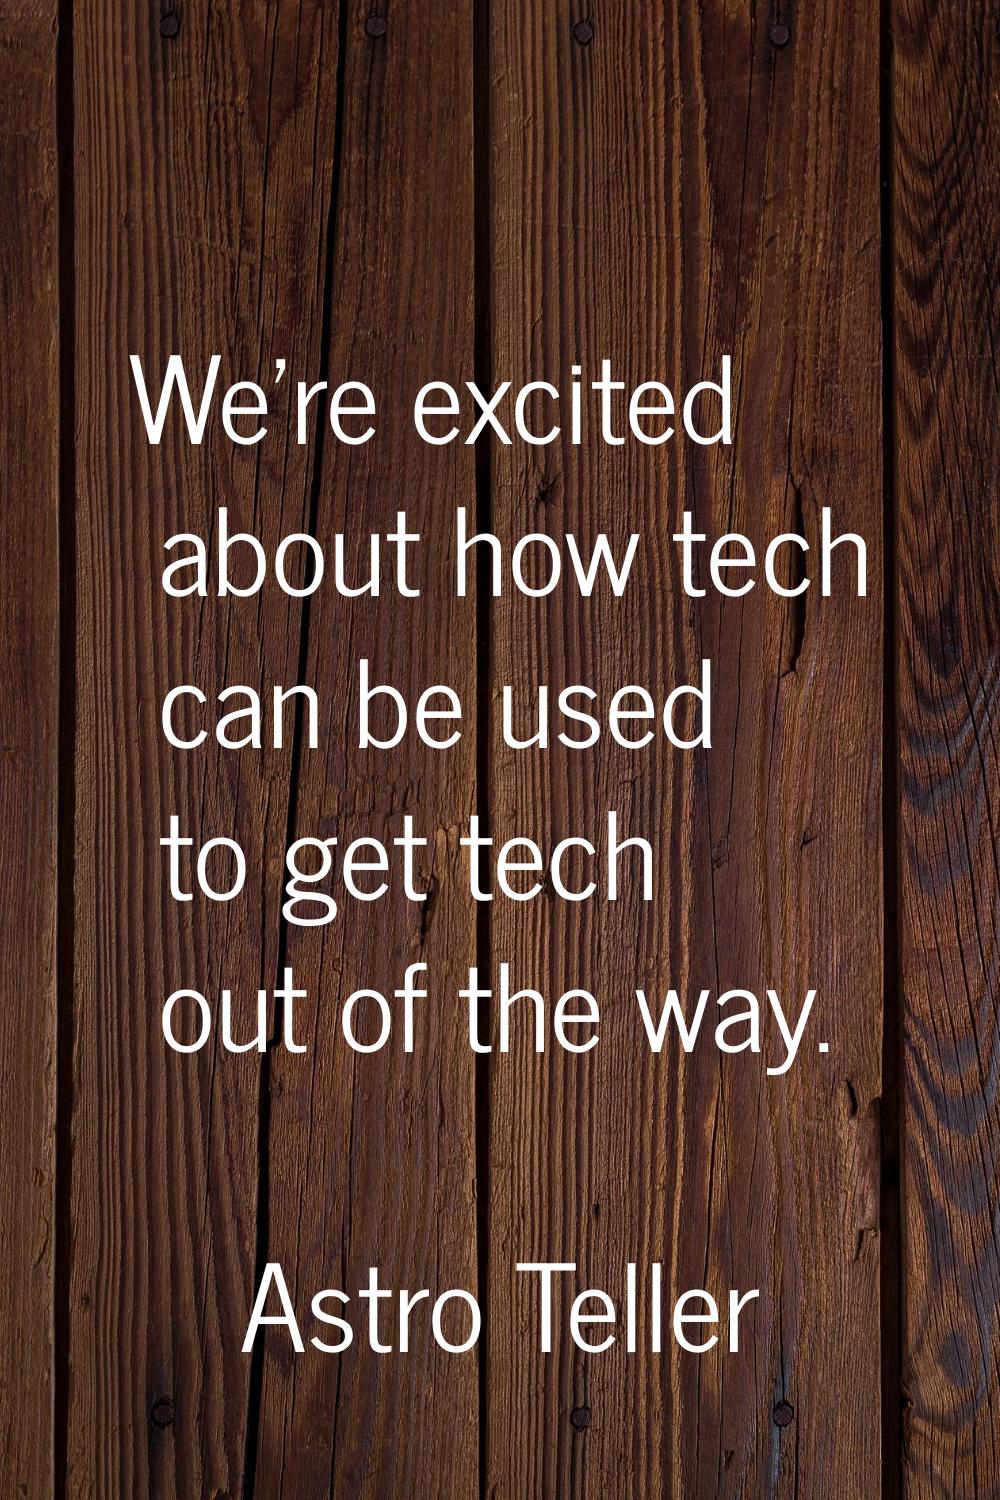 We're excited about how tech can be used to get tech out of the way.